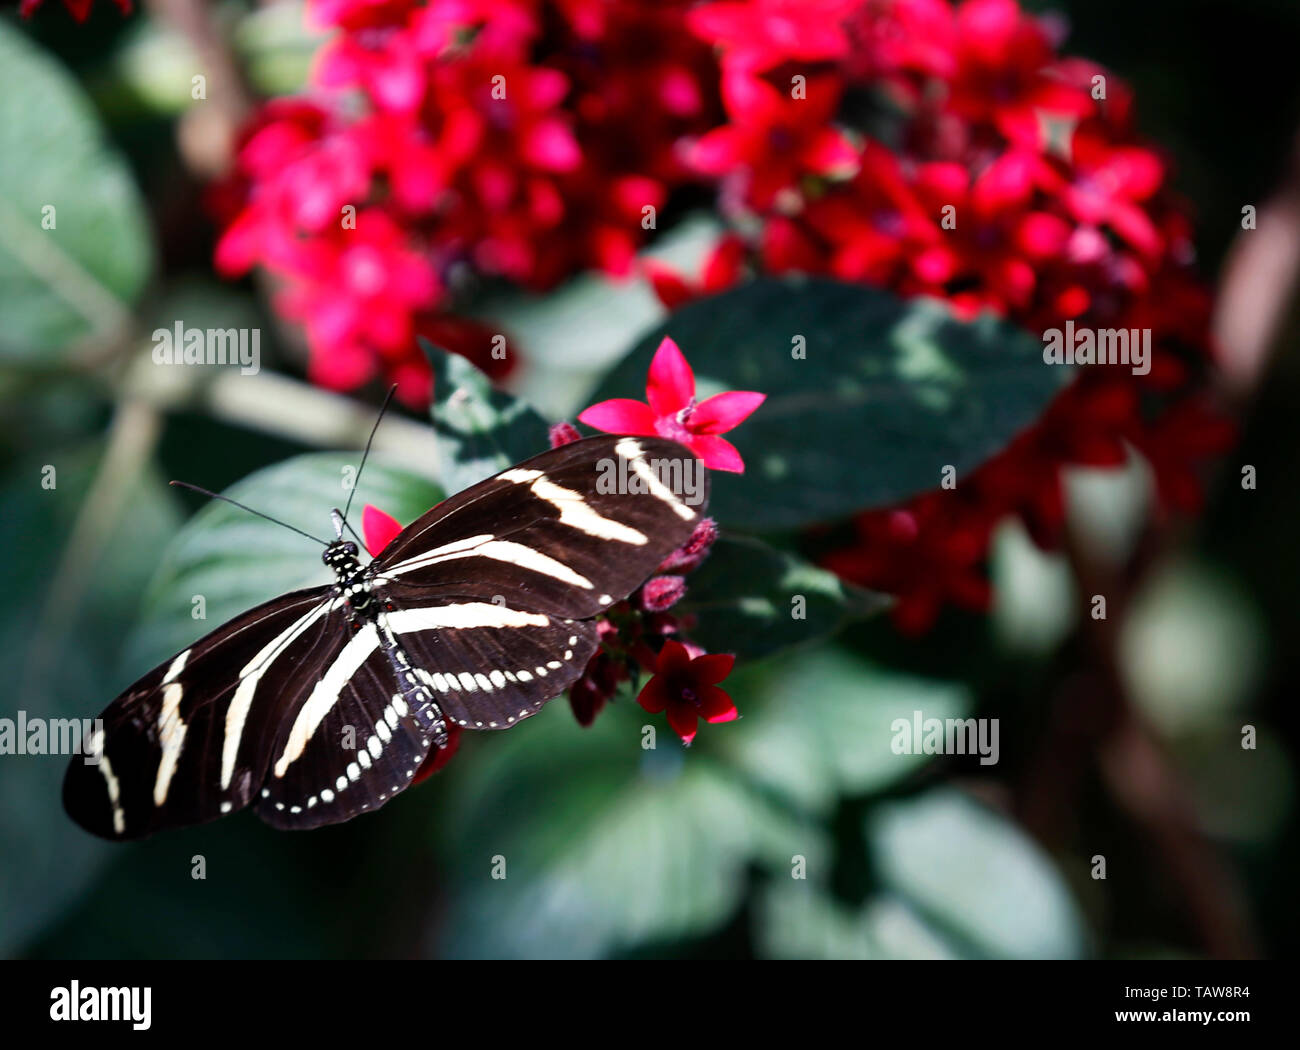 Los Angeles, USA. 27th May, 2019. A butterfly rests on flowers at the Butterfly Pavilion of the Natural History Museum of Los Angeles County in Los Angeles, the United States, May 27, 2019. The butterfly exhibition at the Natural History Museum of Los Angeles County showcases hundreds of butterflies and the plants that surround them. Credit: Li Ying/Xinhua/Alamy Live News Stock Photo